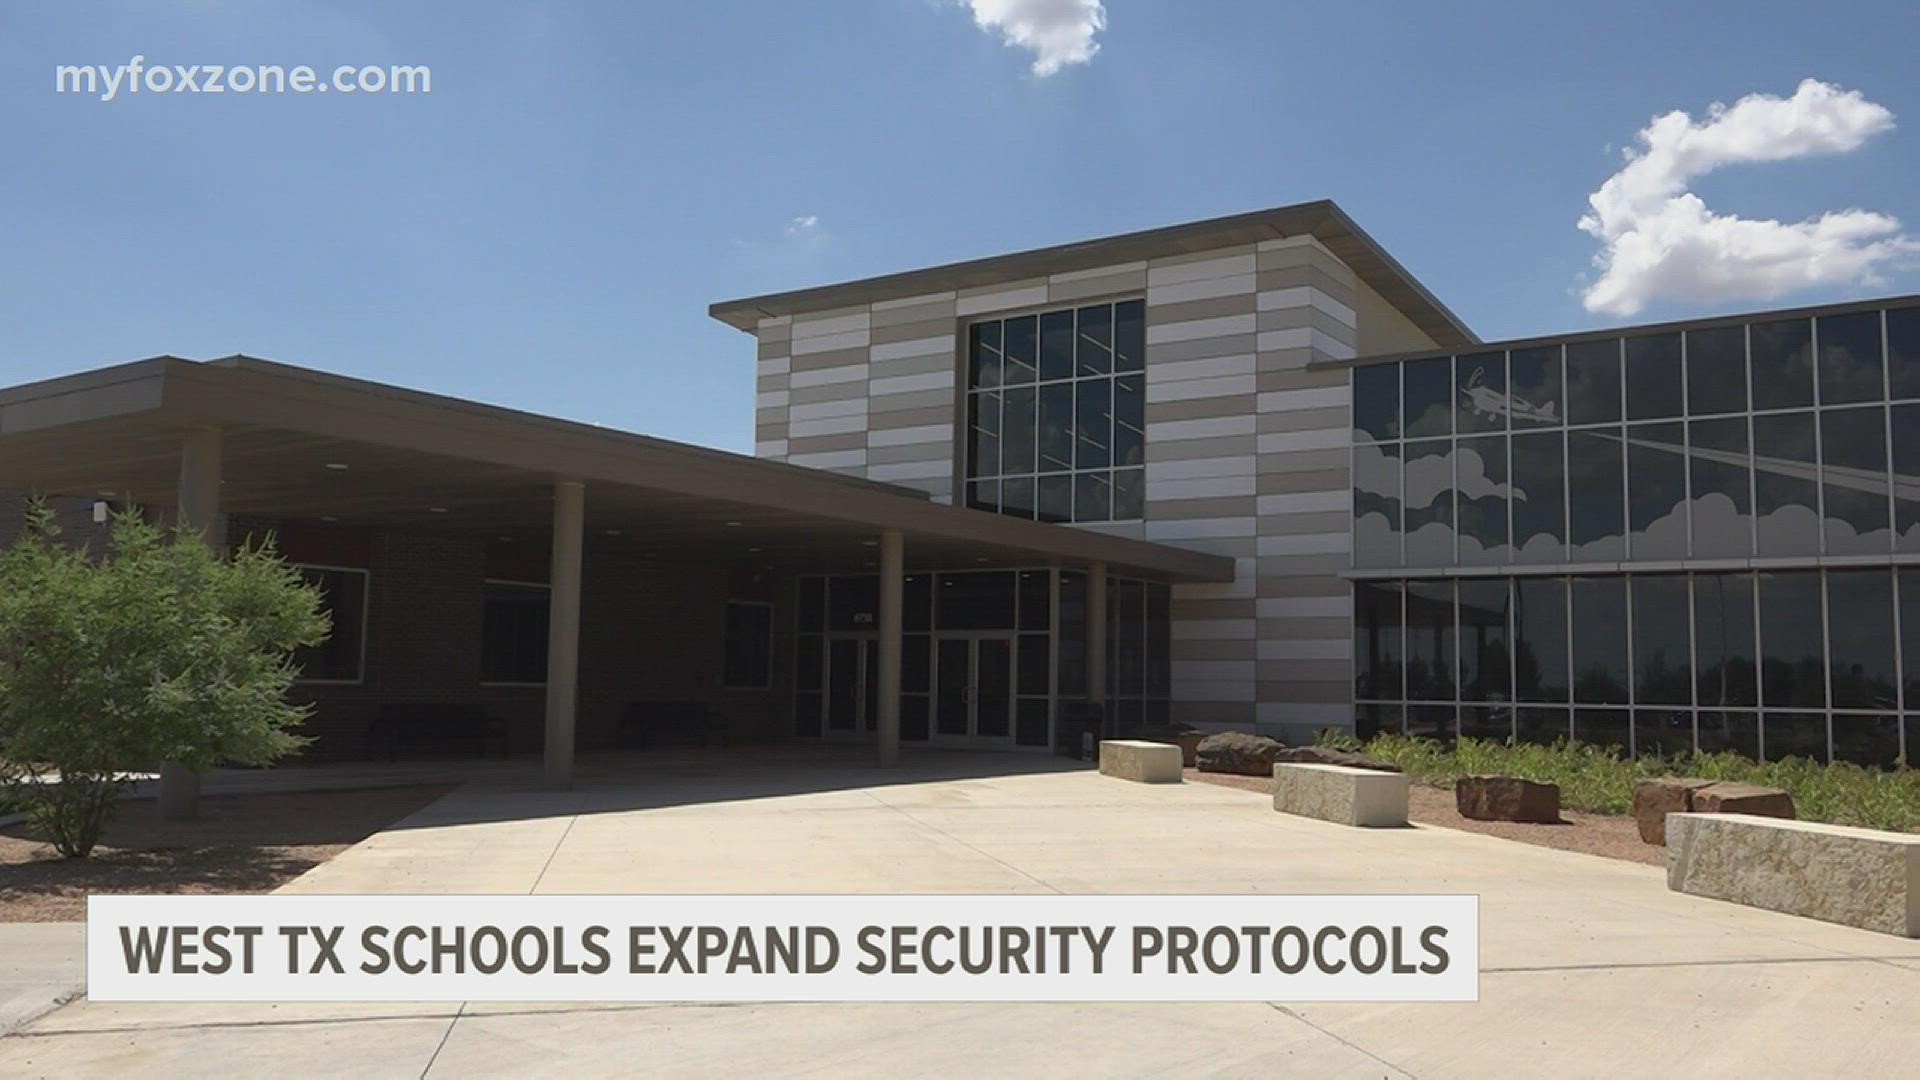 Police departments are collaborating with school districts and conducting specific training aimed at protecting students and staff.